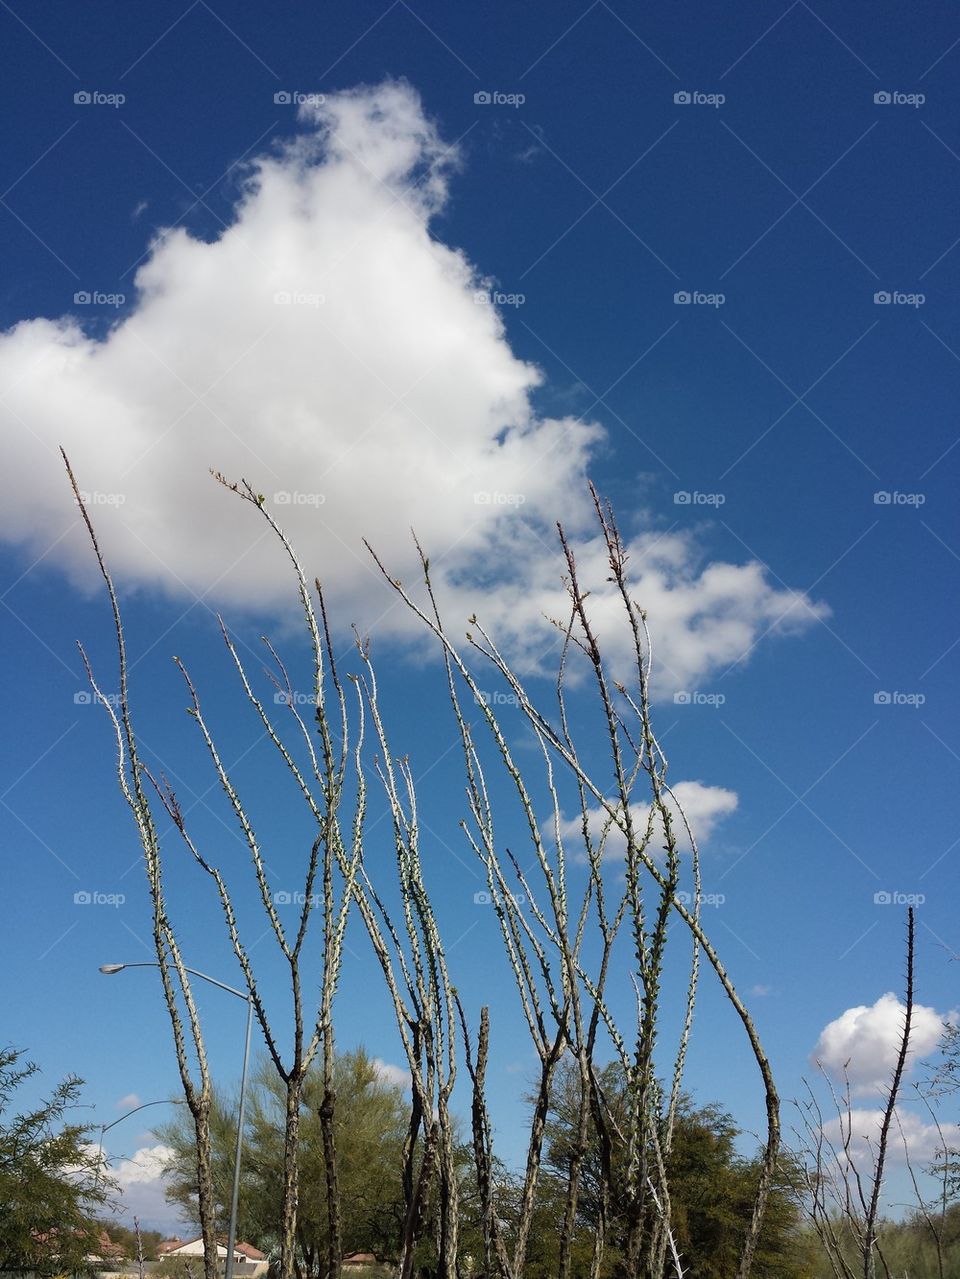 Ocotillo Holding The Cloud